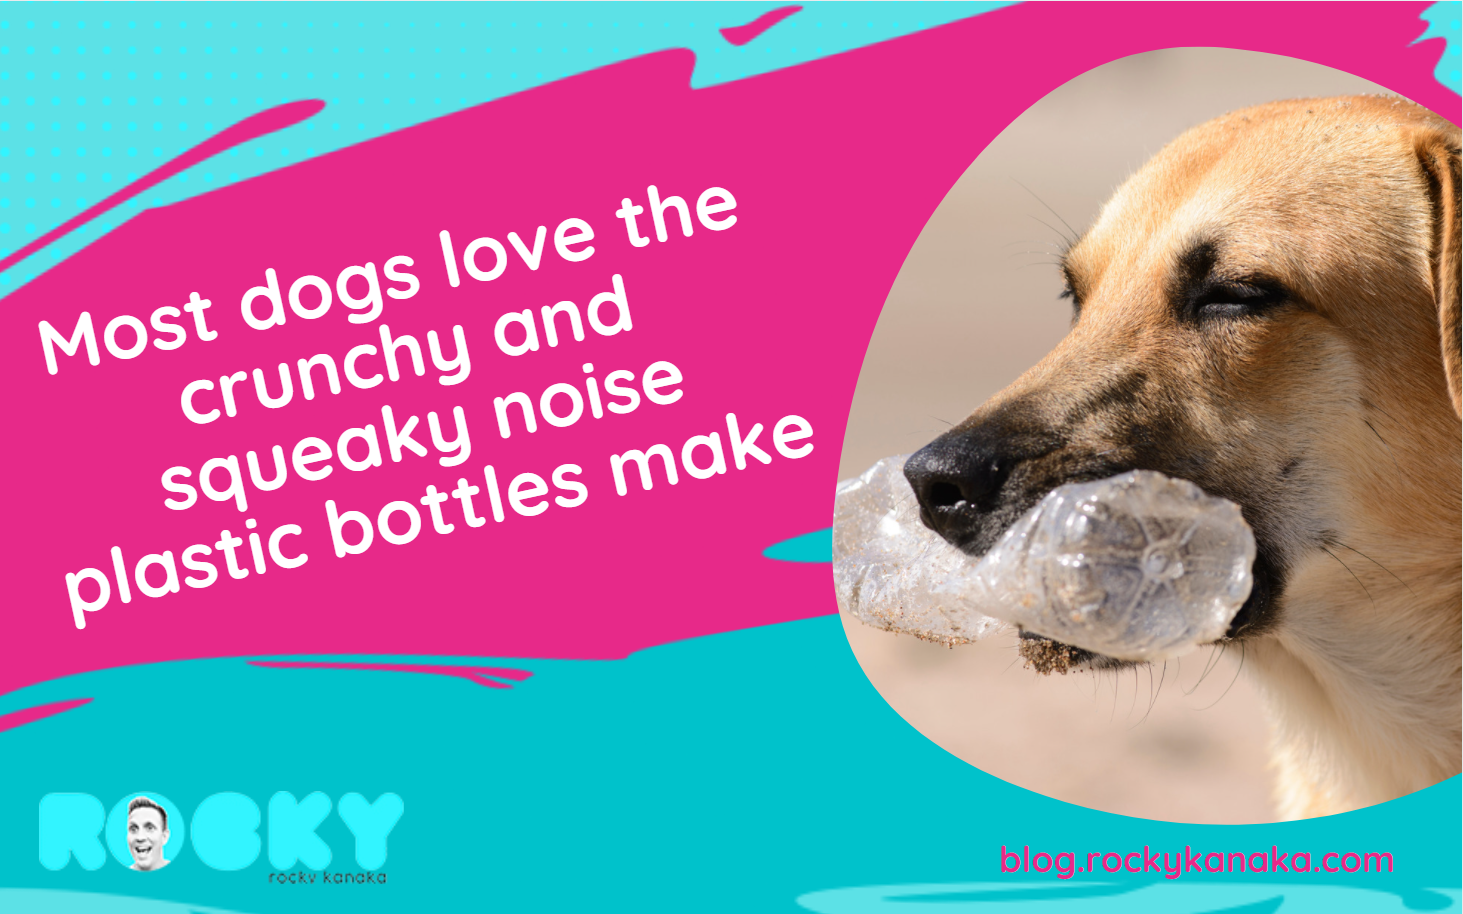 Dog playing with a plastic bottle; wrap the bottle with fabric to make it safe